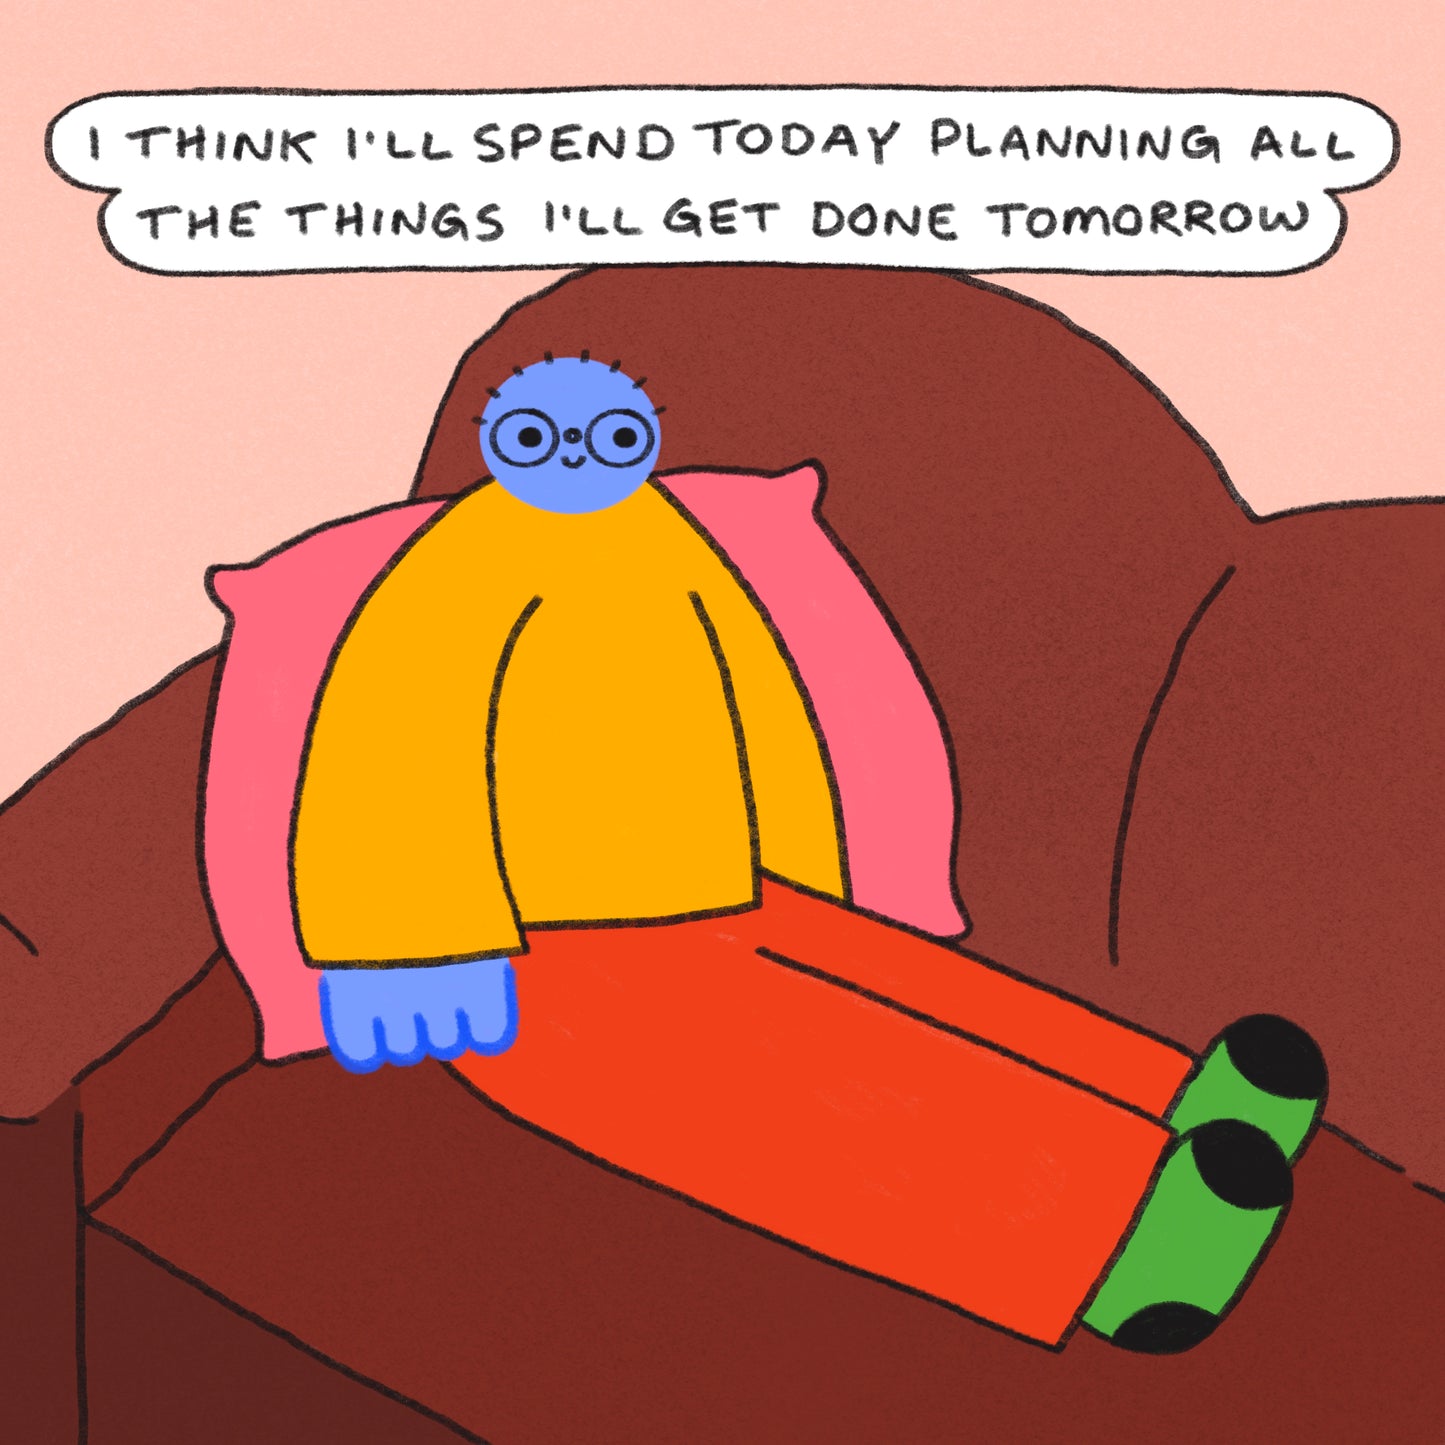 Planning What I’ll Do Tomorrow